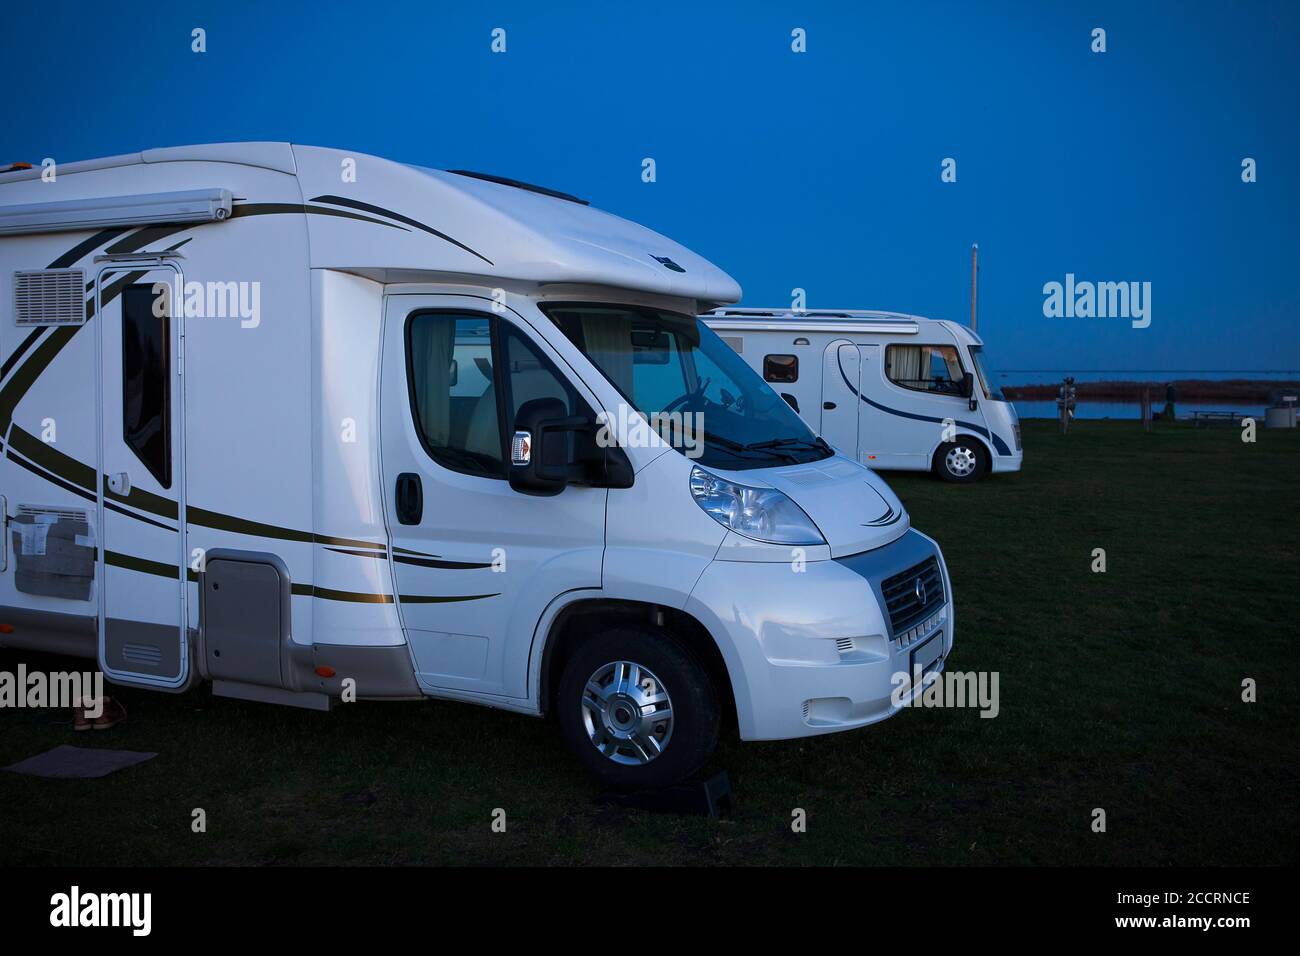 Two motorhomes parked at a campsite in the evening. Stock Photo